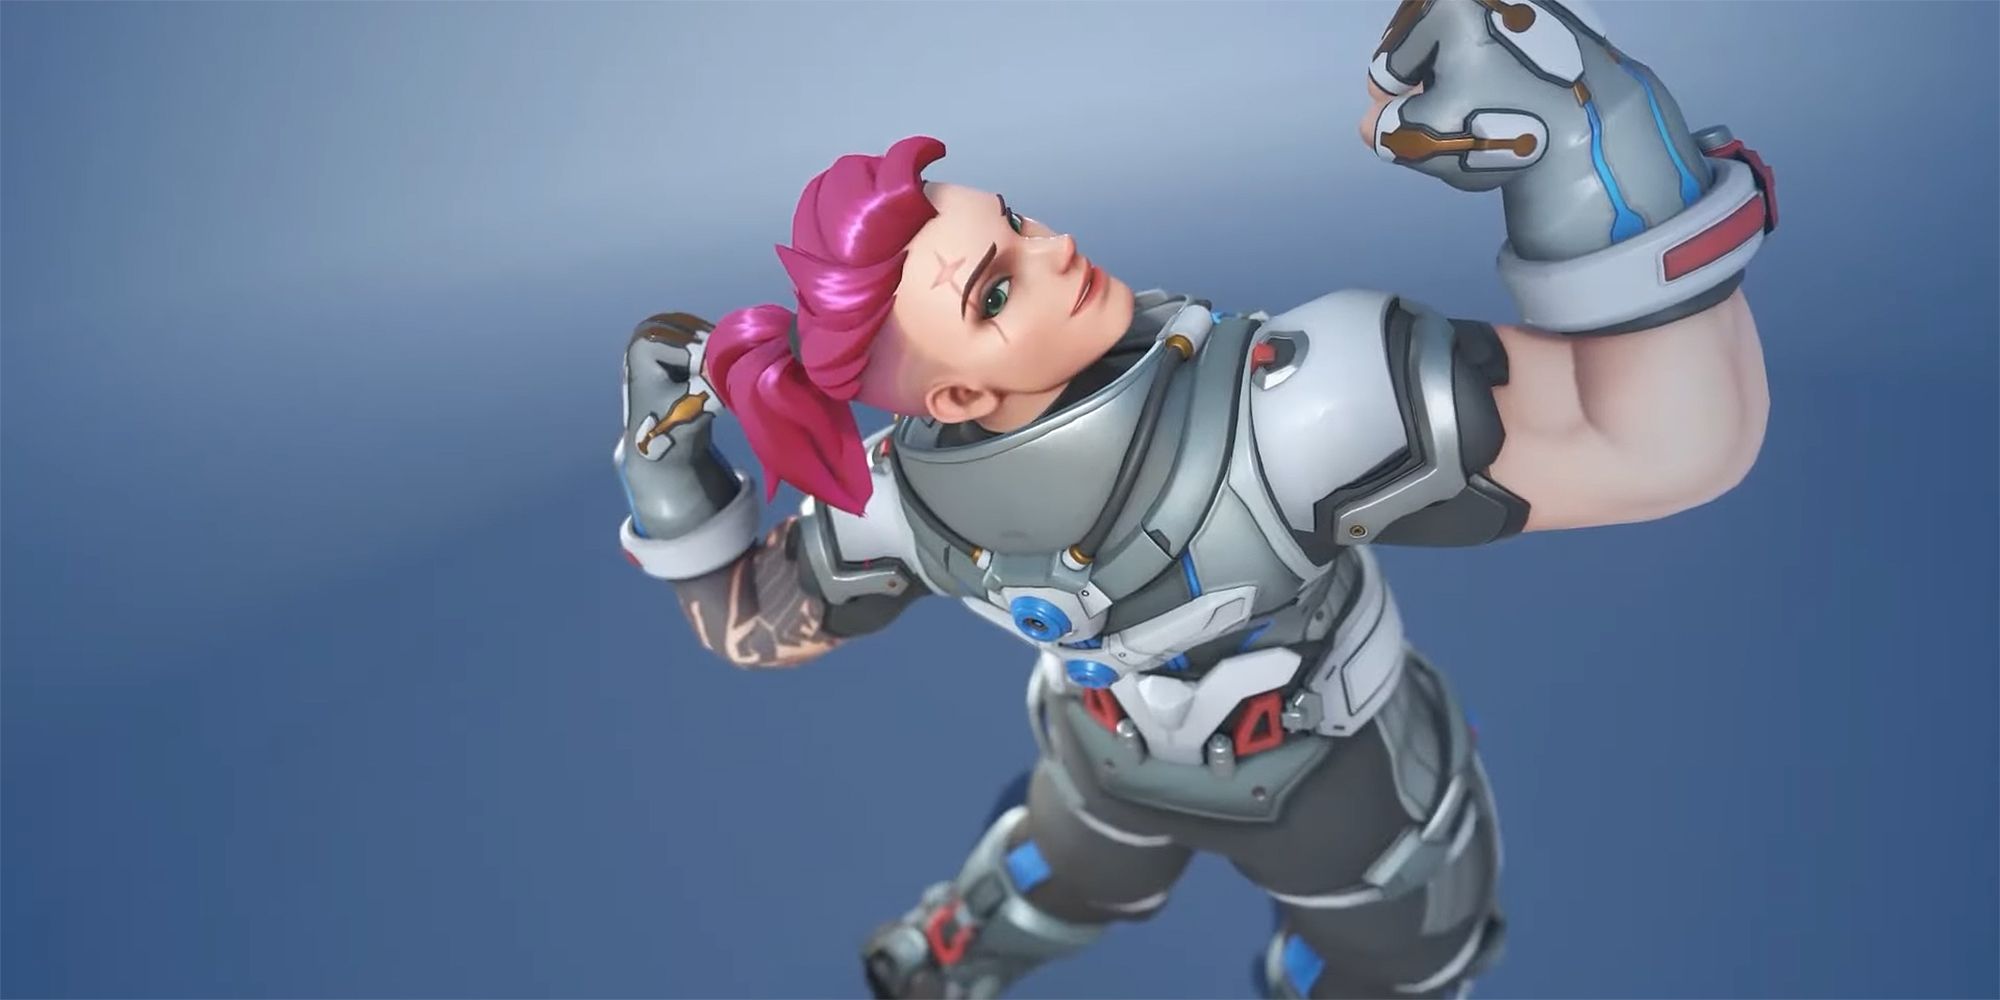 zarya flexing her muscles in highlight intro